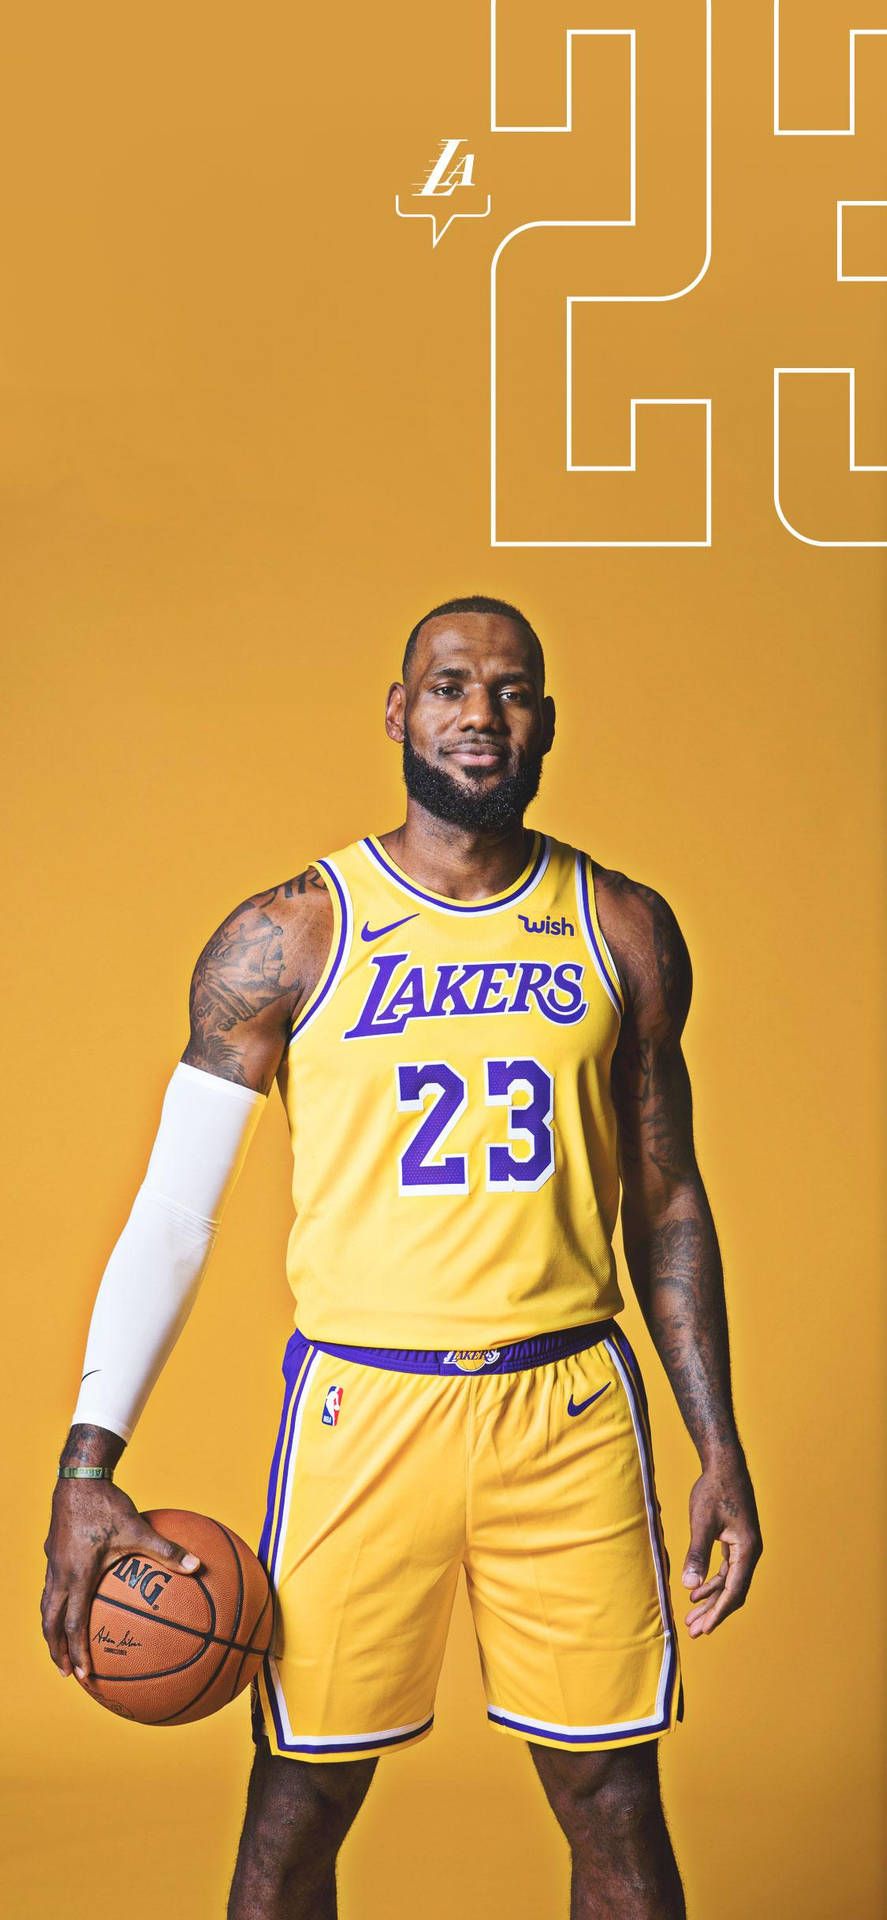 Lebron james lakers wallpaper for android phone and desktop backgrounds 2020 in 2020 | Lakers wallpaper, Lakers basketball, Lakers - Lebron James